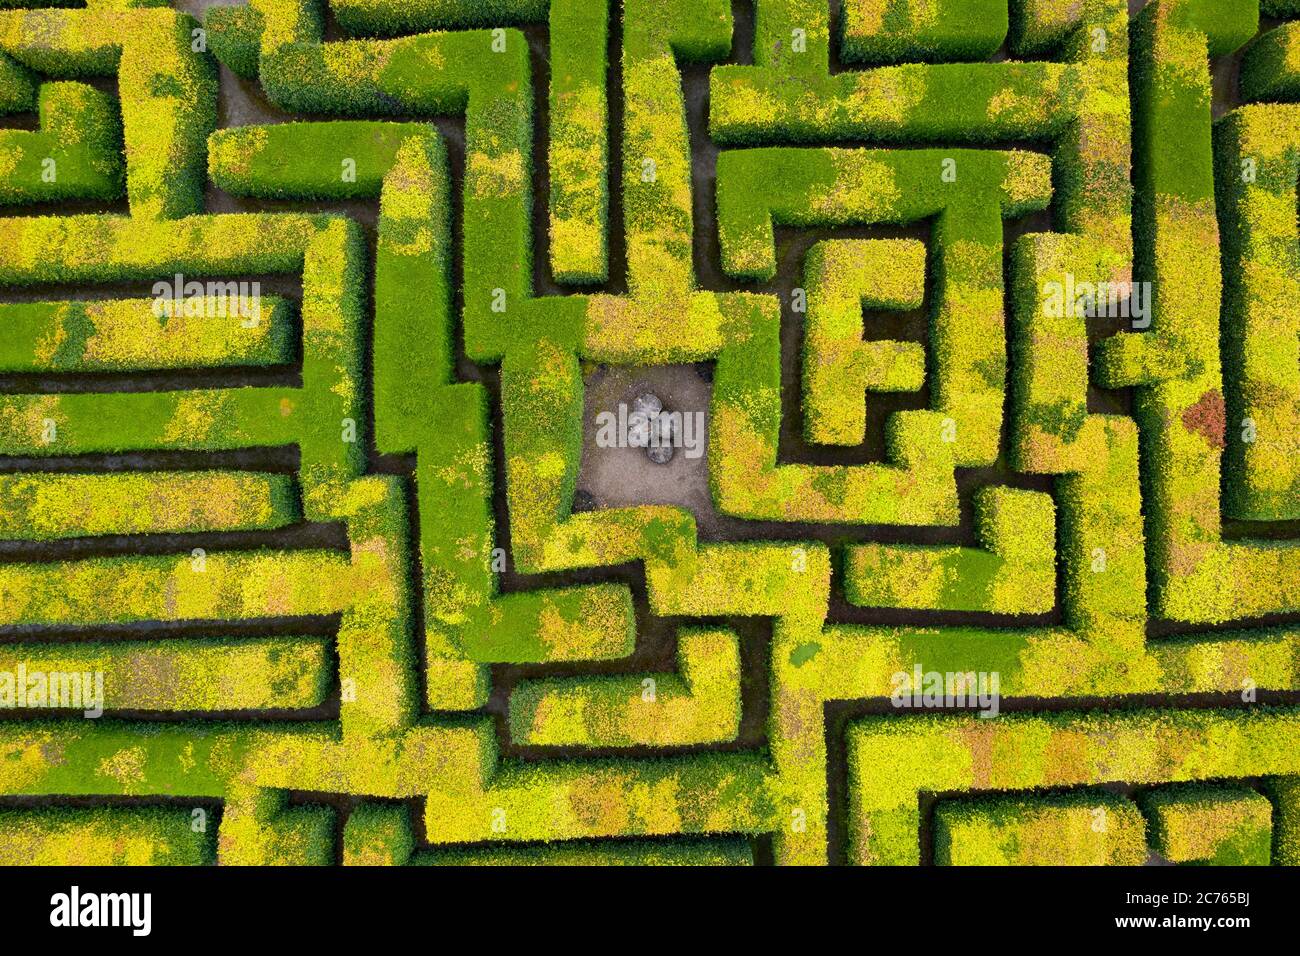 Innerleithen, Scotland, UK. 14 July, 2020, Aerial view of maze at Traquair House in the Scottish Borders, the oldest inhabited house in Scotland. The house is preparing to reopen to the public on Friday. Access to the maze will be limited to one household at a time. Iain Masterton/Alamy Live News Stock Photo